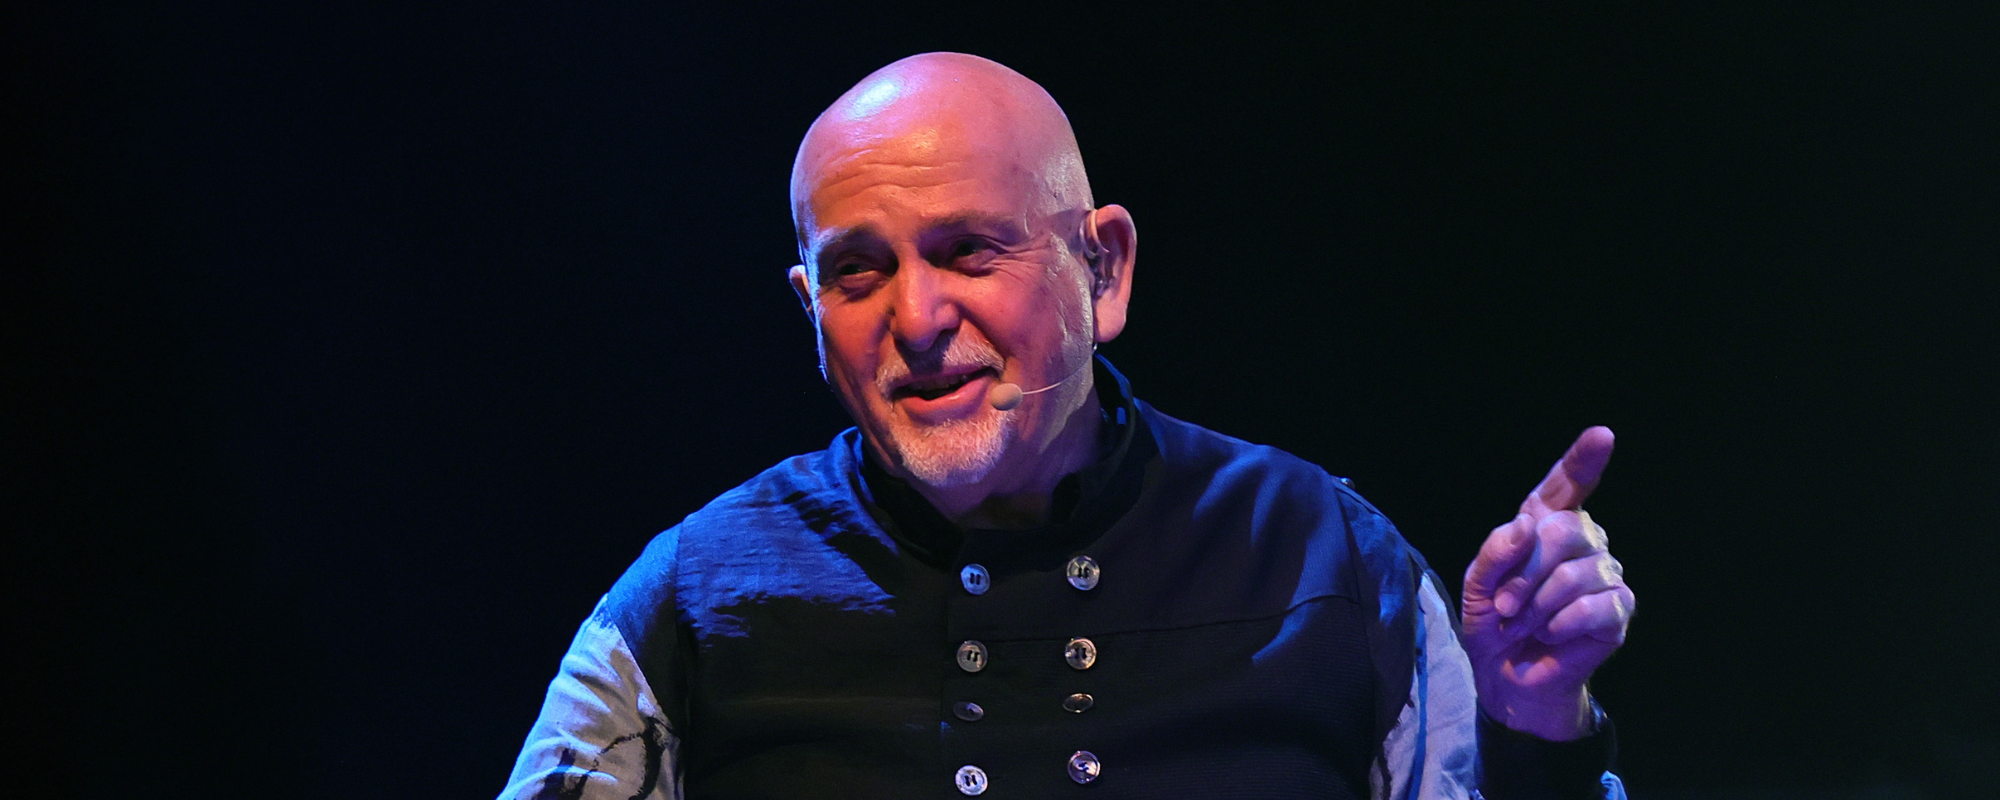 4 Songs from Peter Gabriel’s ‘i/o’ with Lyrics That Reveal the Album’s Spiritual Meaning